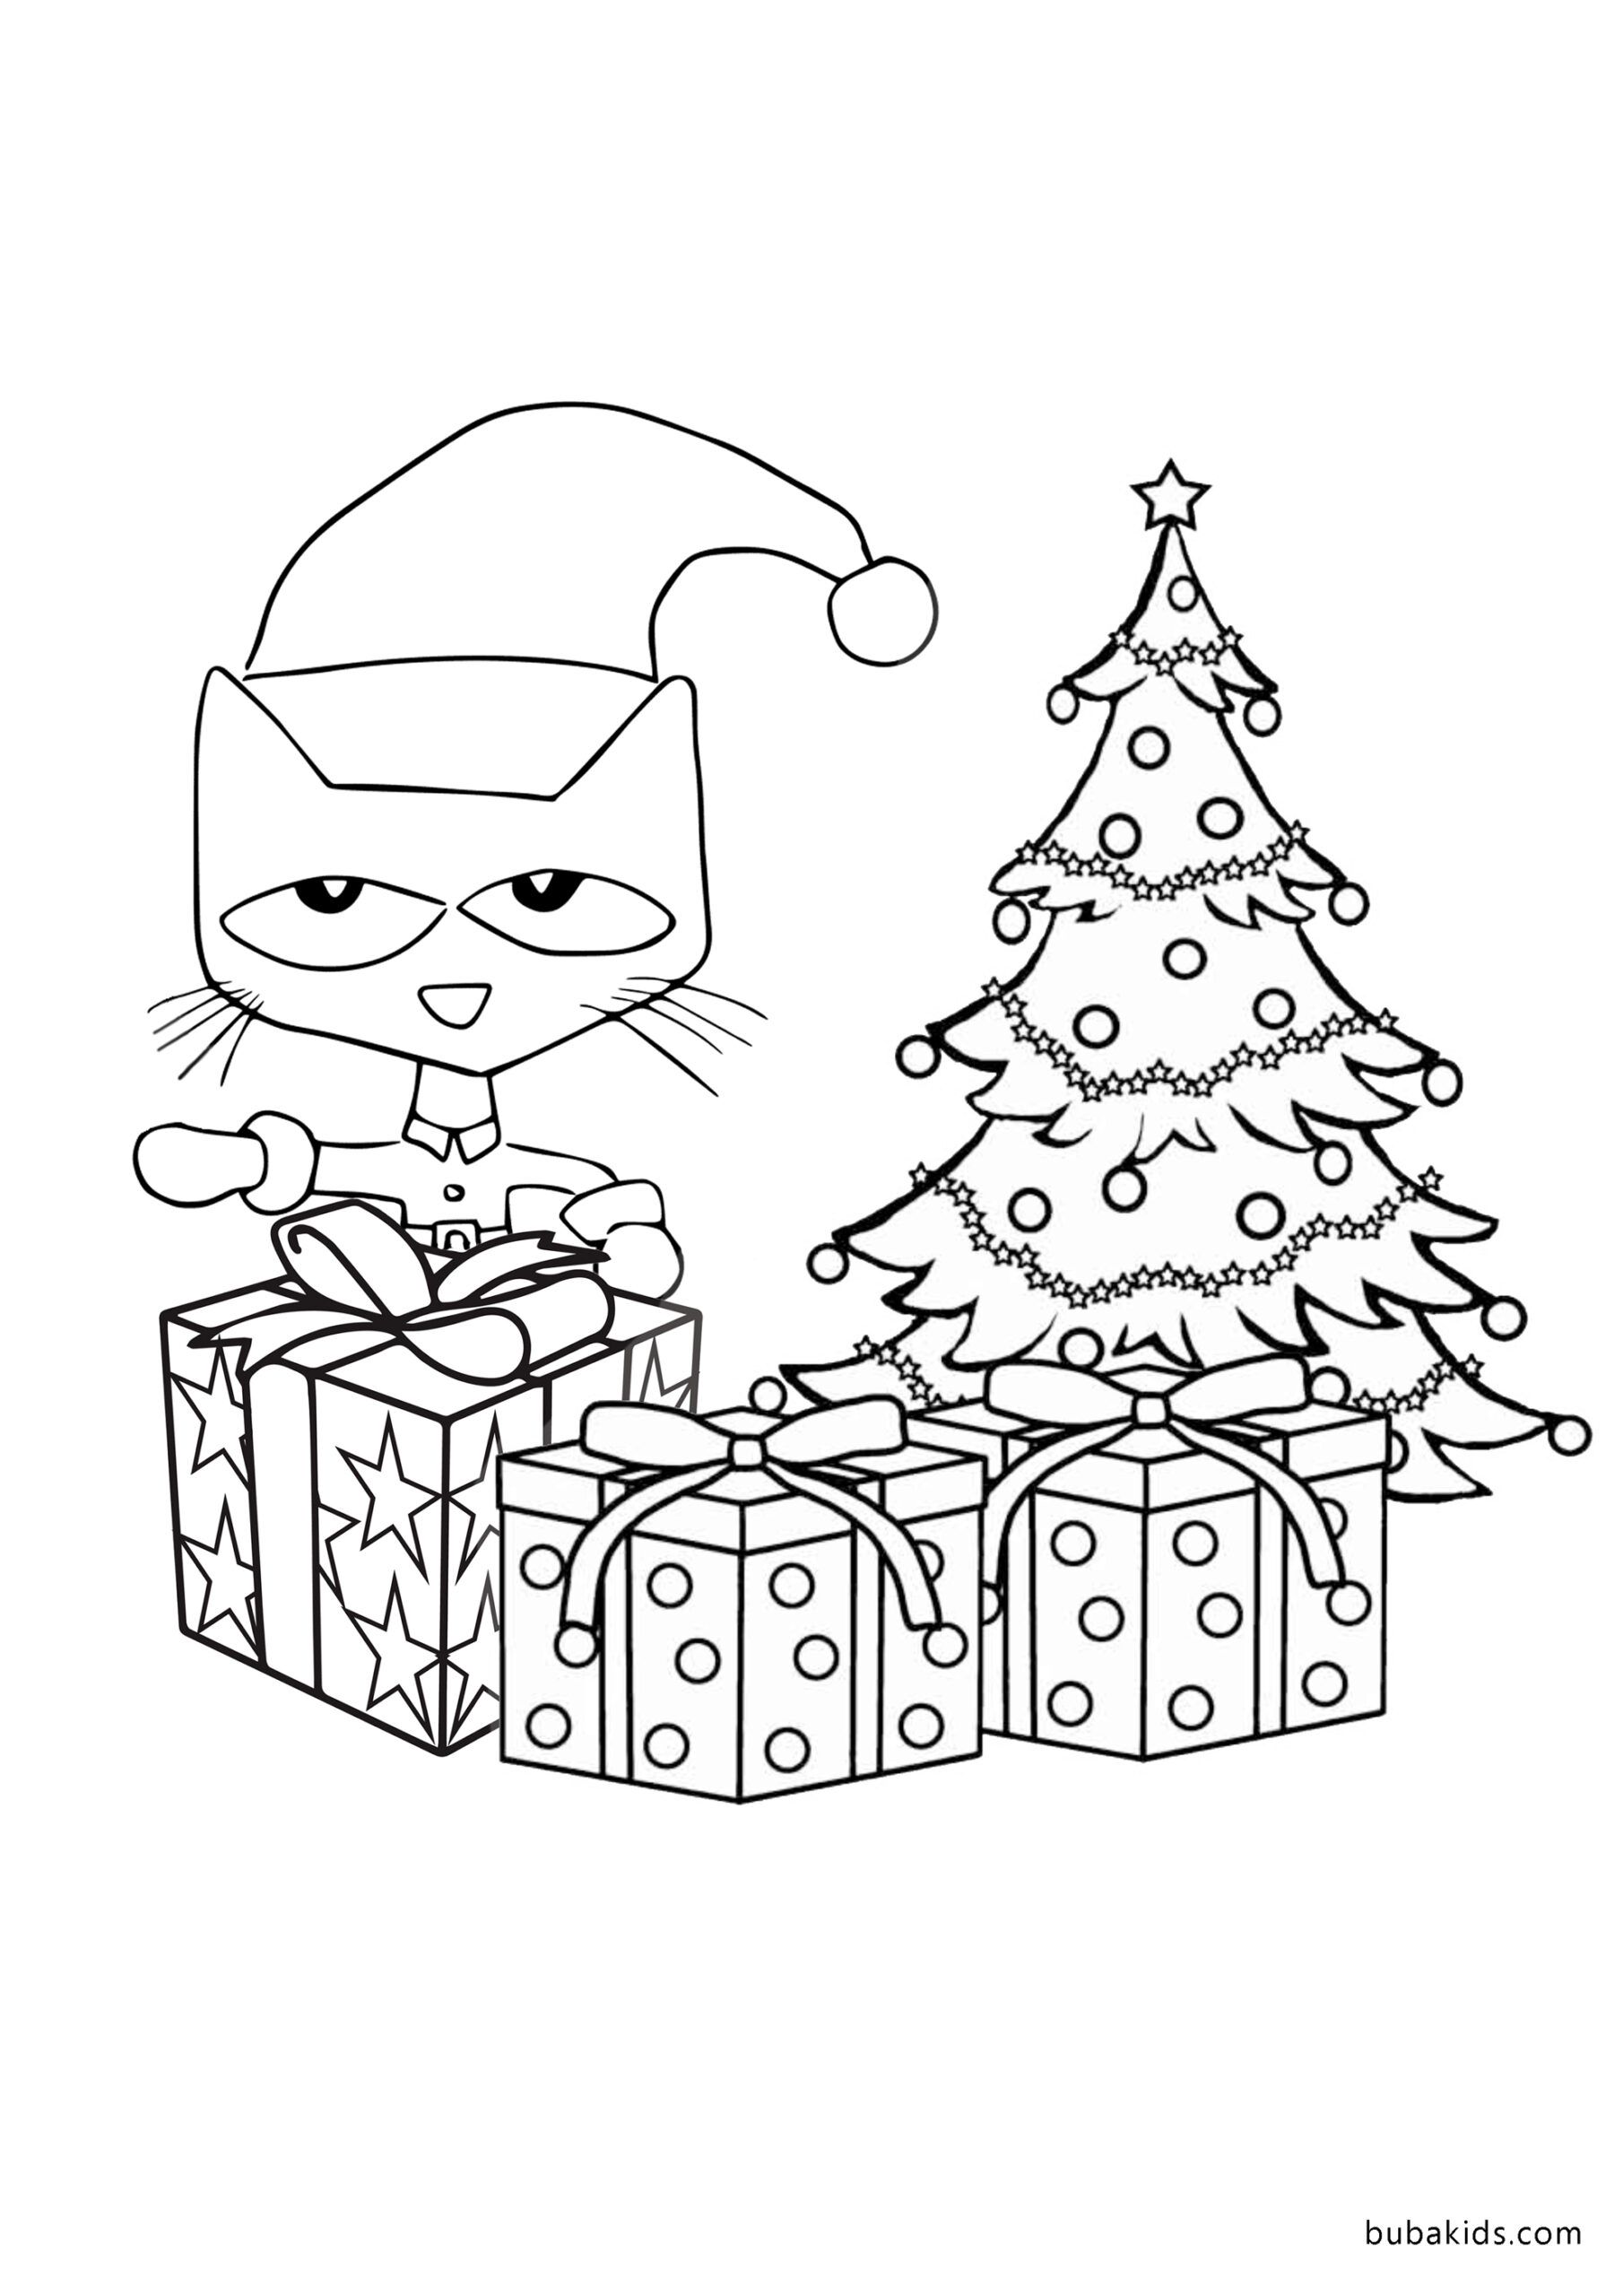 Pete the cat christmas gift coloring page Wallpaper